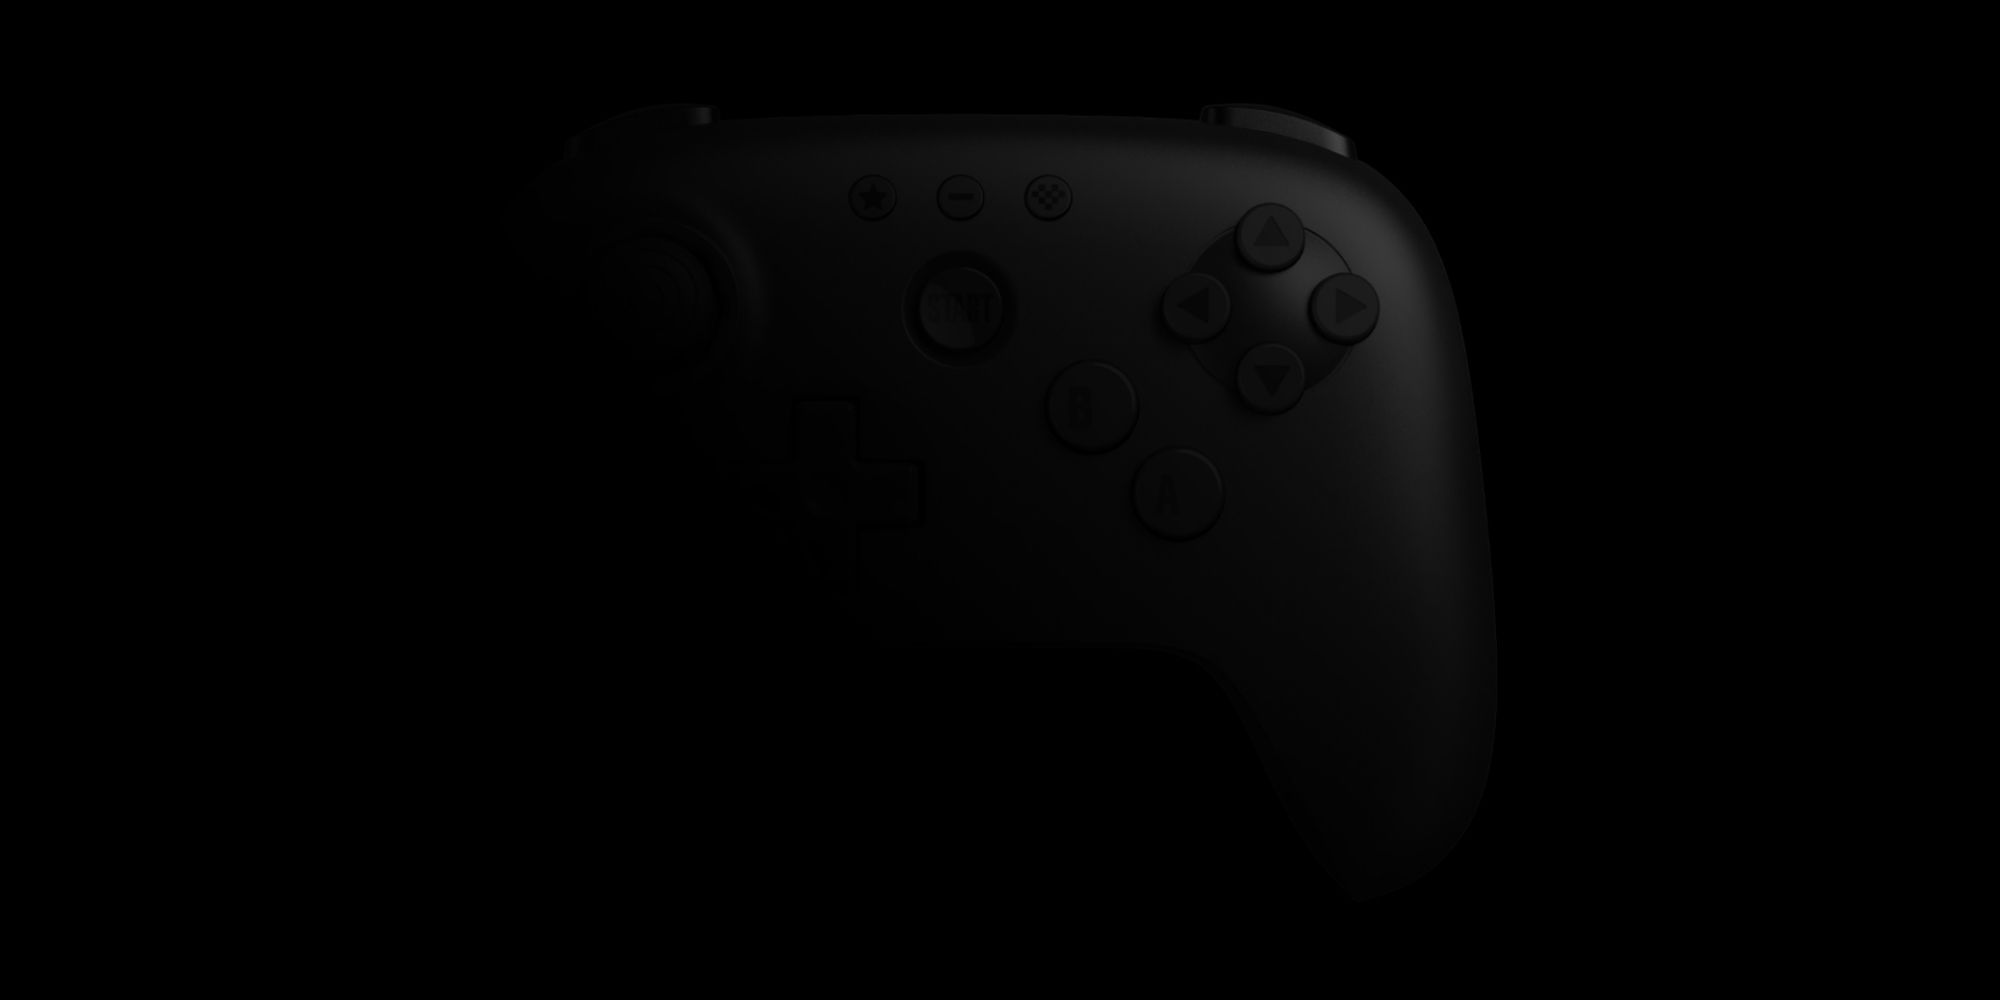 A controller for a third party console, the Analogue 3D. It is largely hidden, so we can only make out that it is a sleek, black controller. 